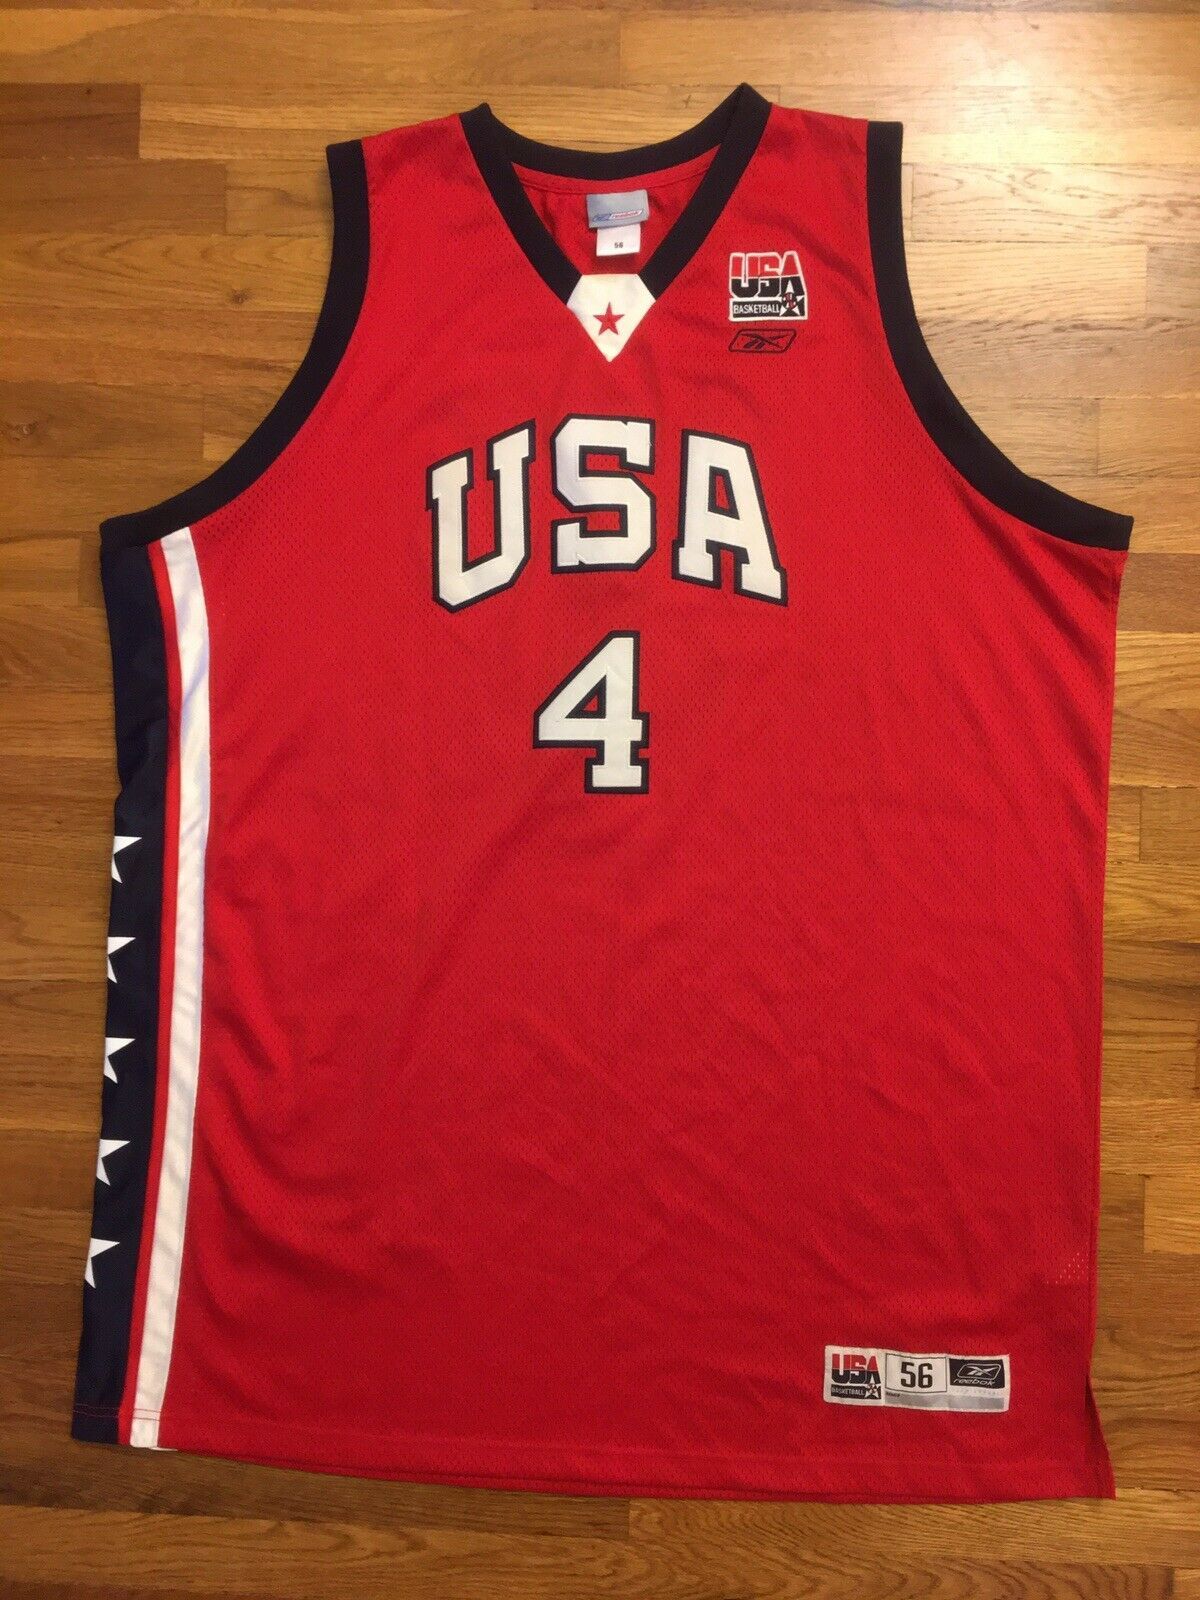 Authentic Reebok 2003 Team USA Olympic Allen and 37 similar items